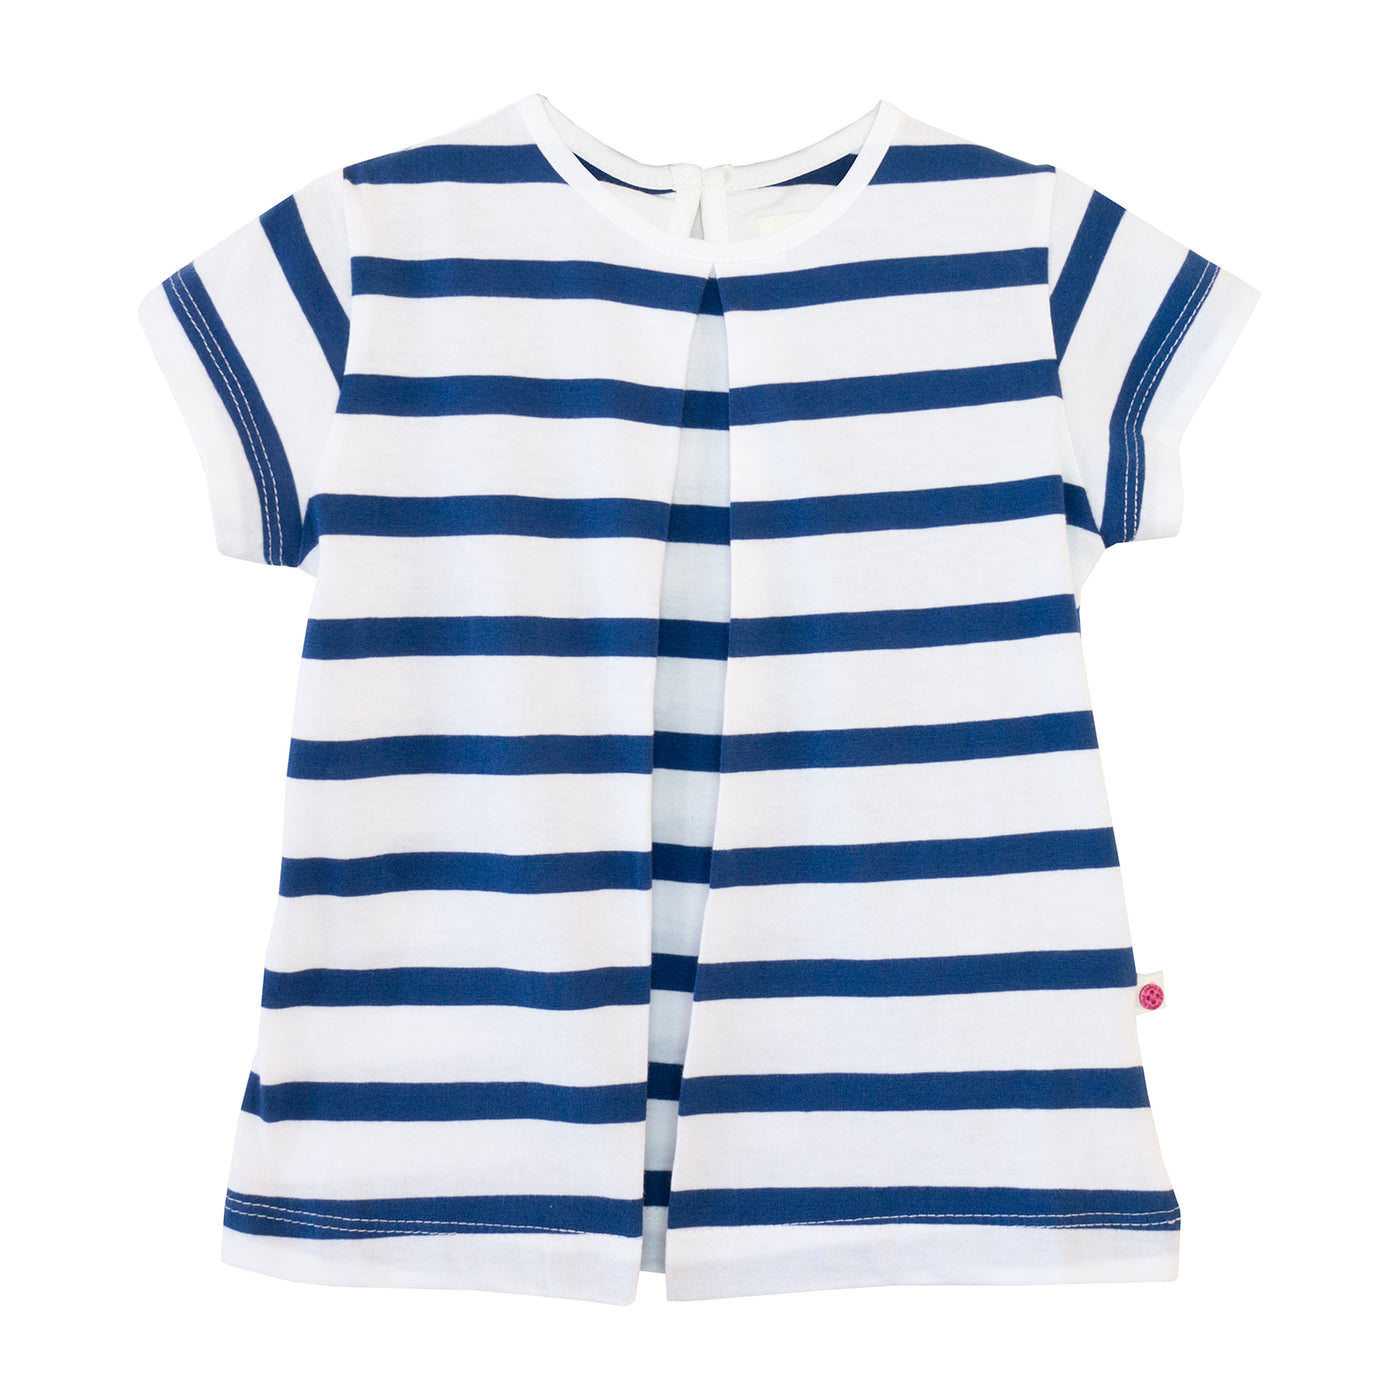 Sugar Pink Striped Pleat Front T-Shirt - Bright White